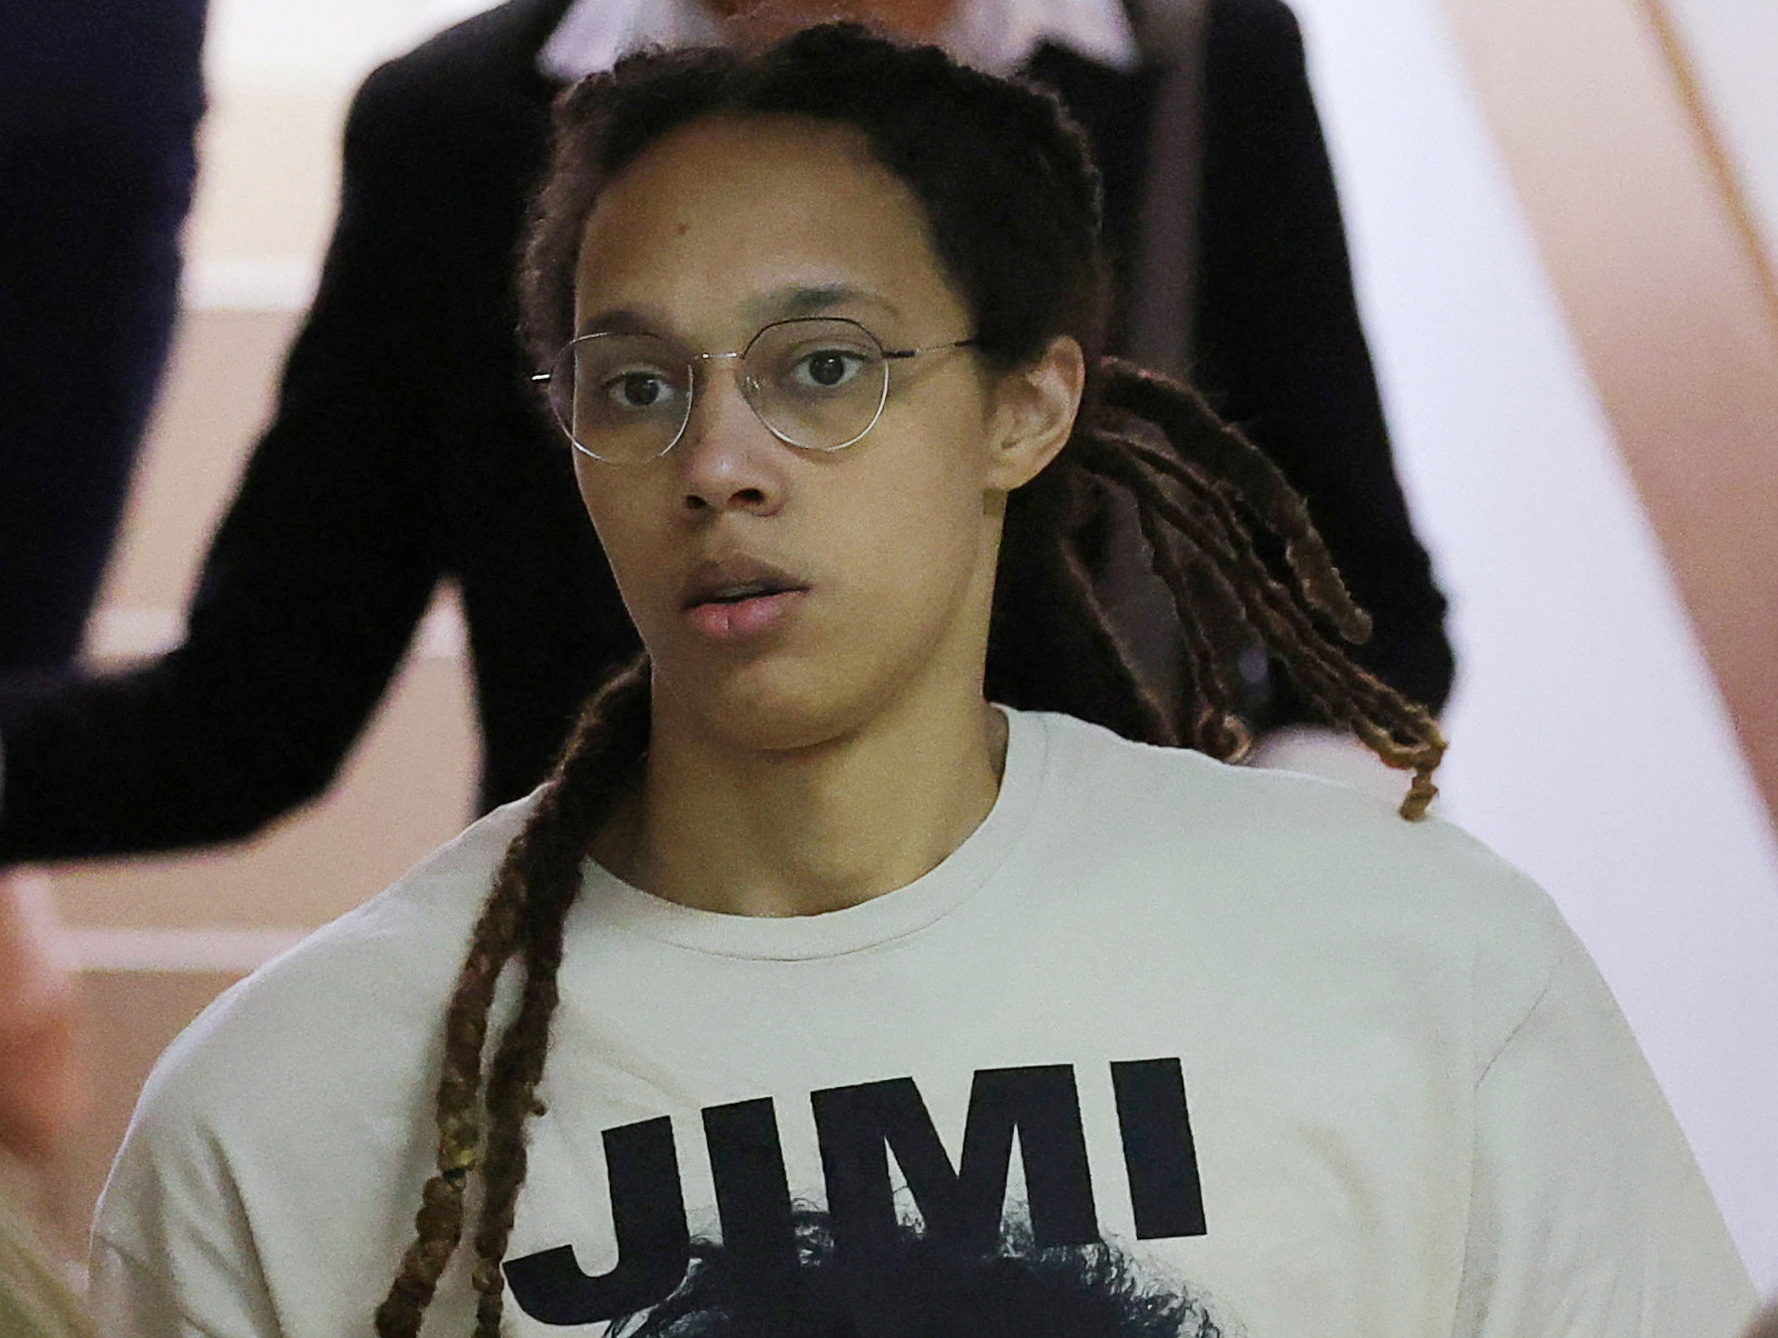 U.S. basketball player Brittney Griner before a court hearing in Khimki, outside Moscow, Russia, July 1, 2022. REUTERS/Evgenia Novozhenina